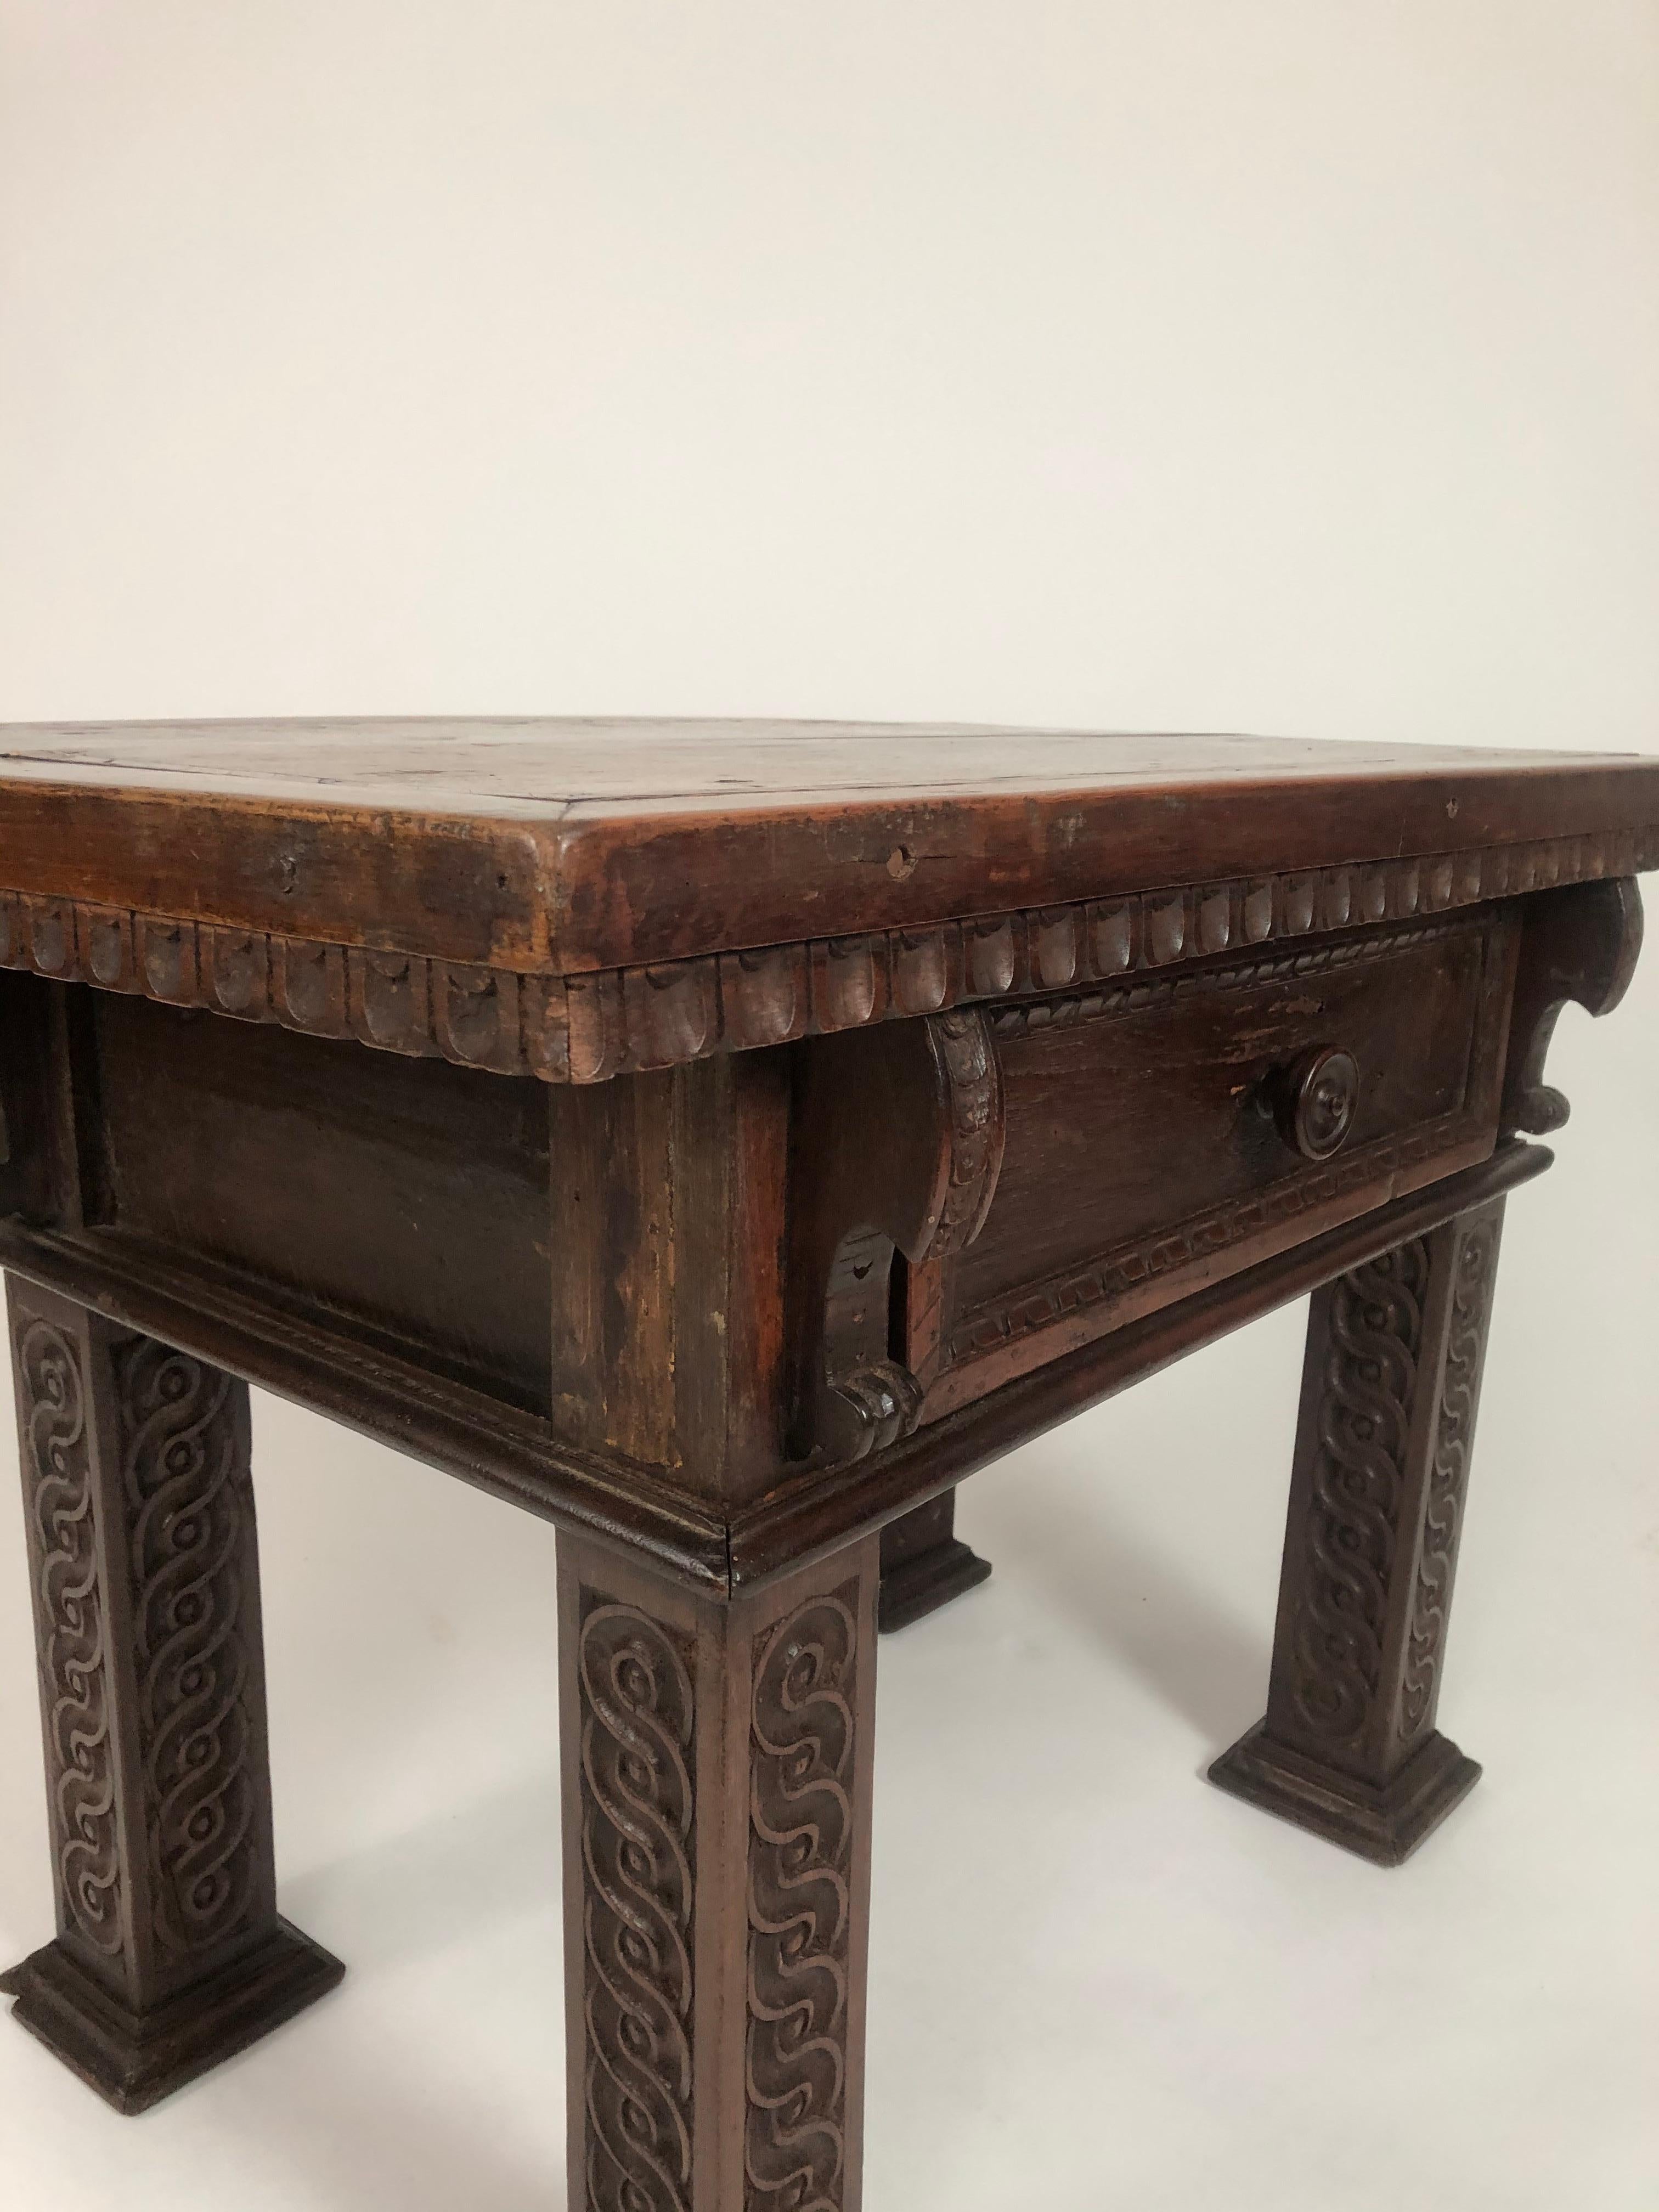 19th Century Italian Renaissance Revival Carved Oak and Walnut Side or Coffee Table